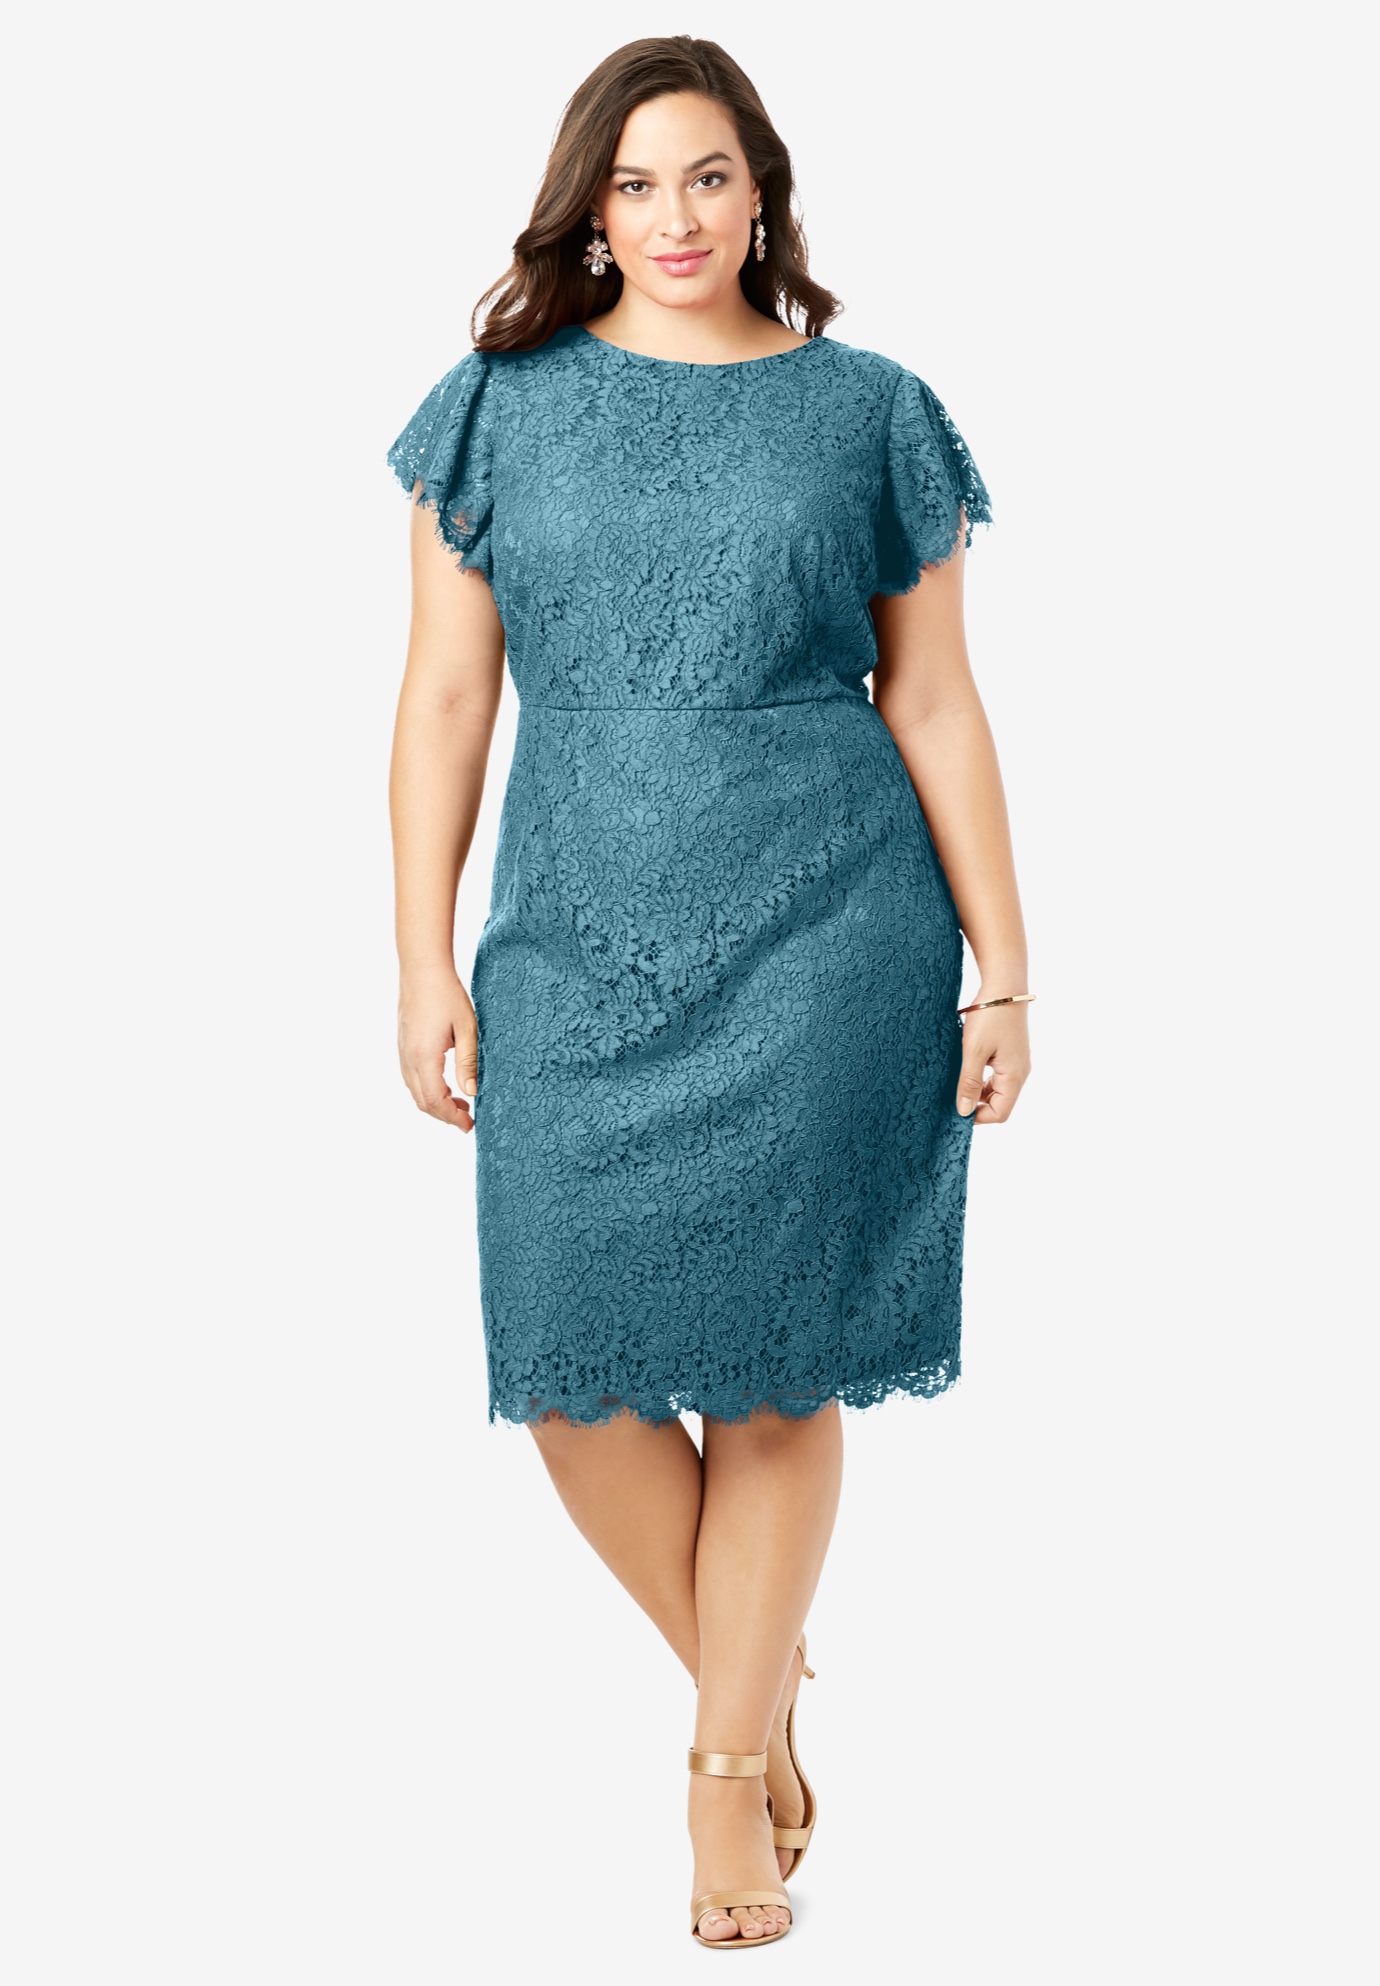 Lace Sheath Dress with Flutter Sleeves | Jessica London